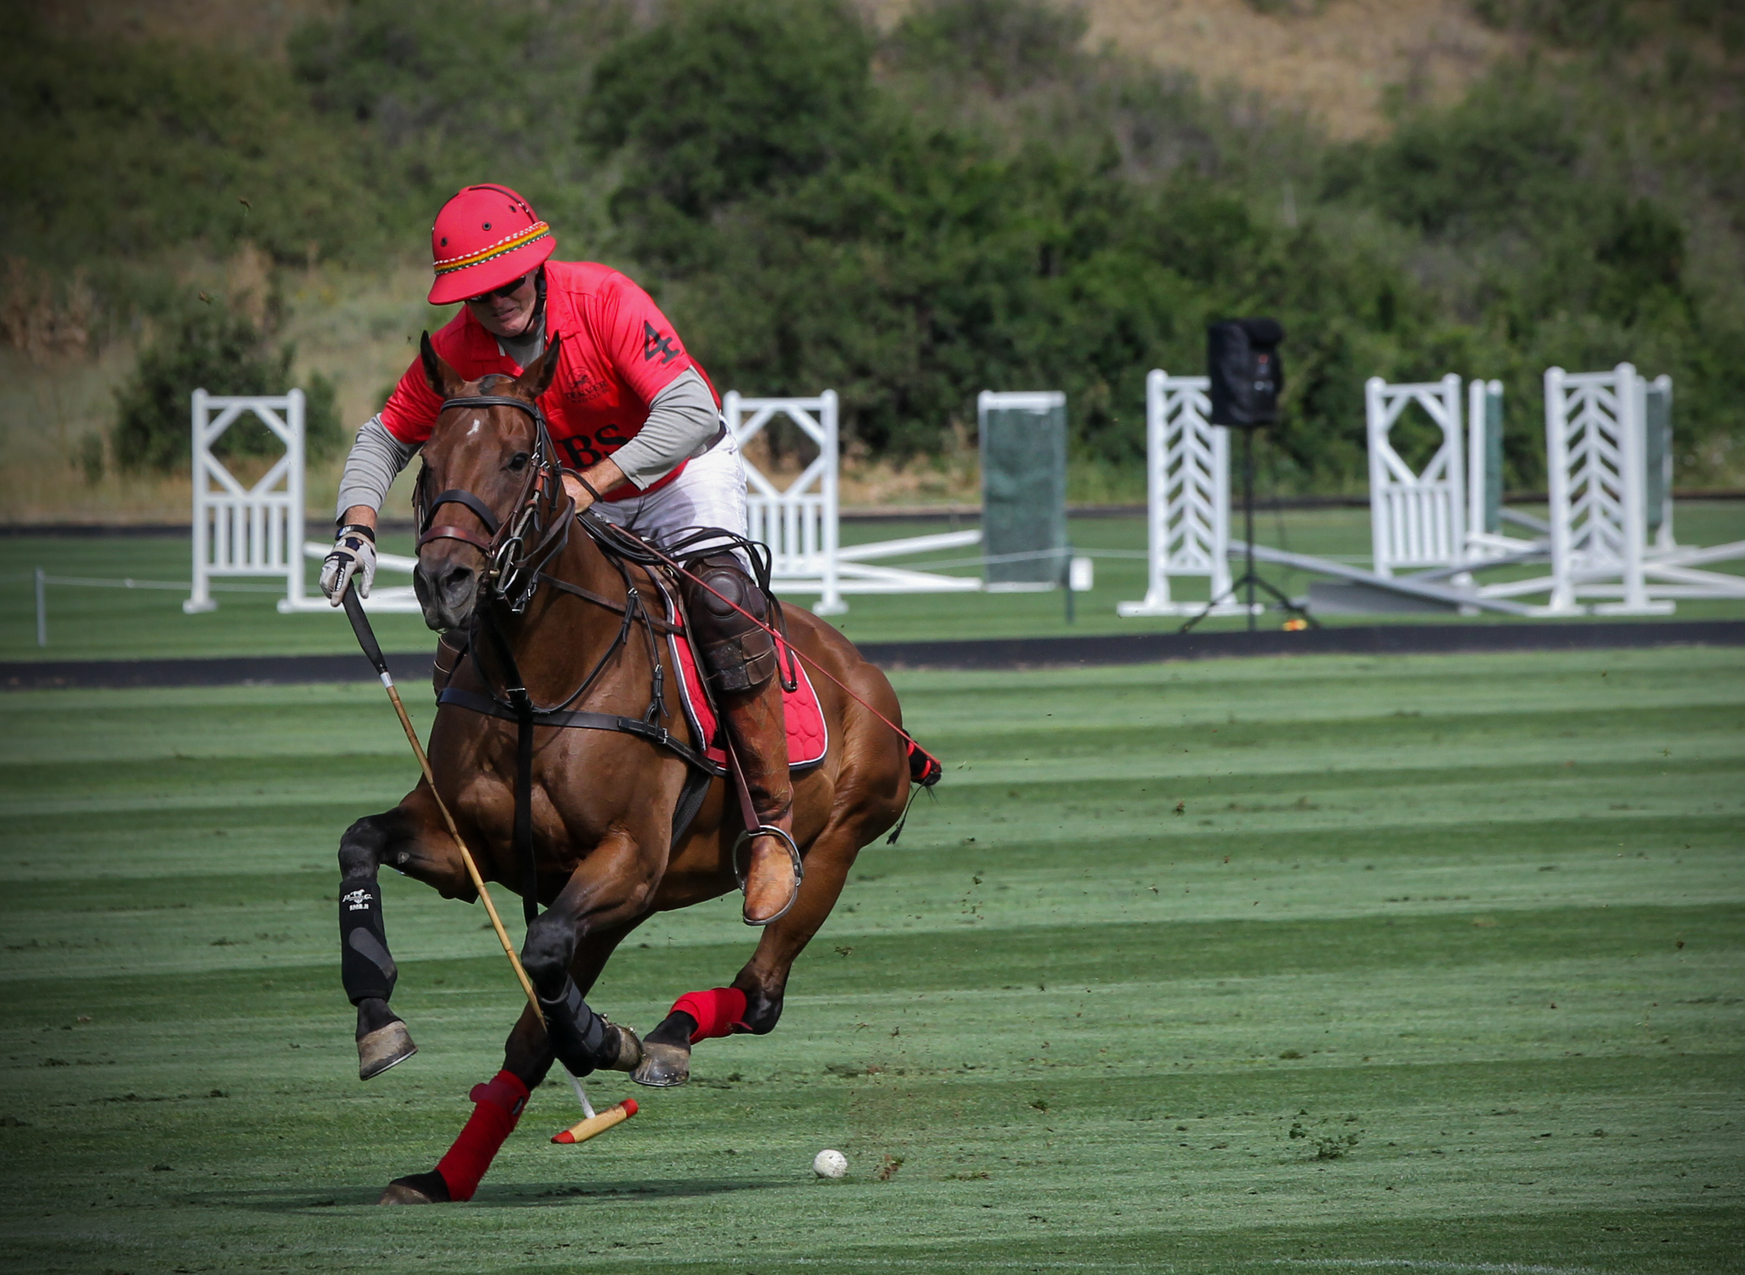 A man is riding a horse on a field while playing polo.